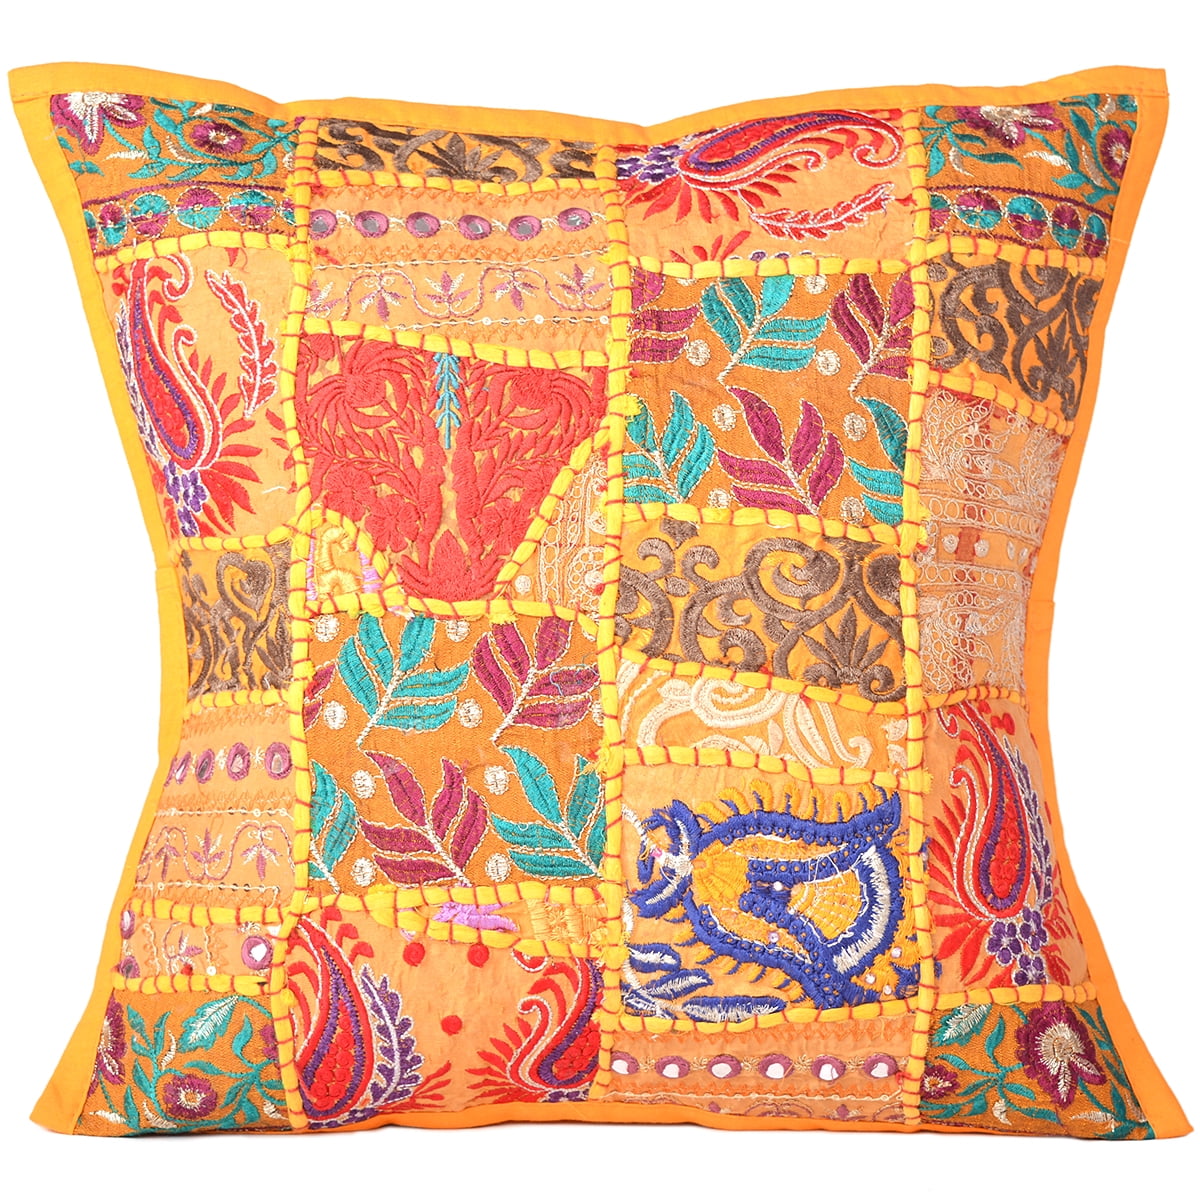 Oussum Embroidered Decorative Throw Pillows Covers for Sofa Couch Patio ...